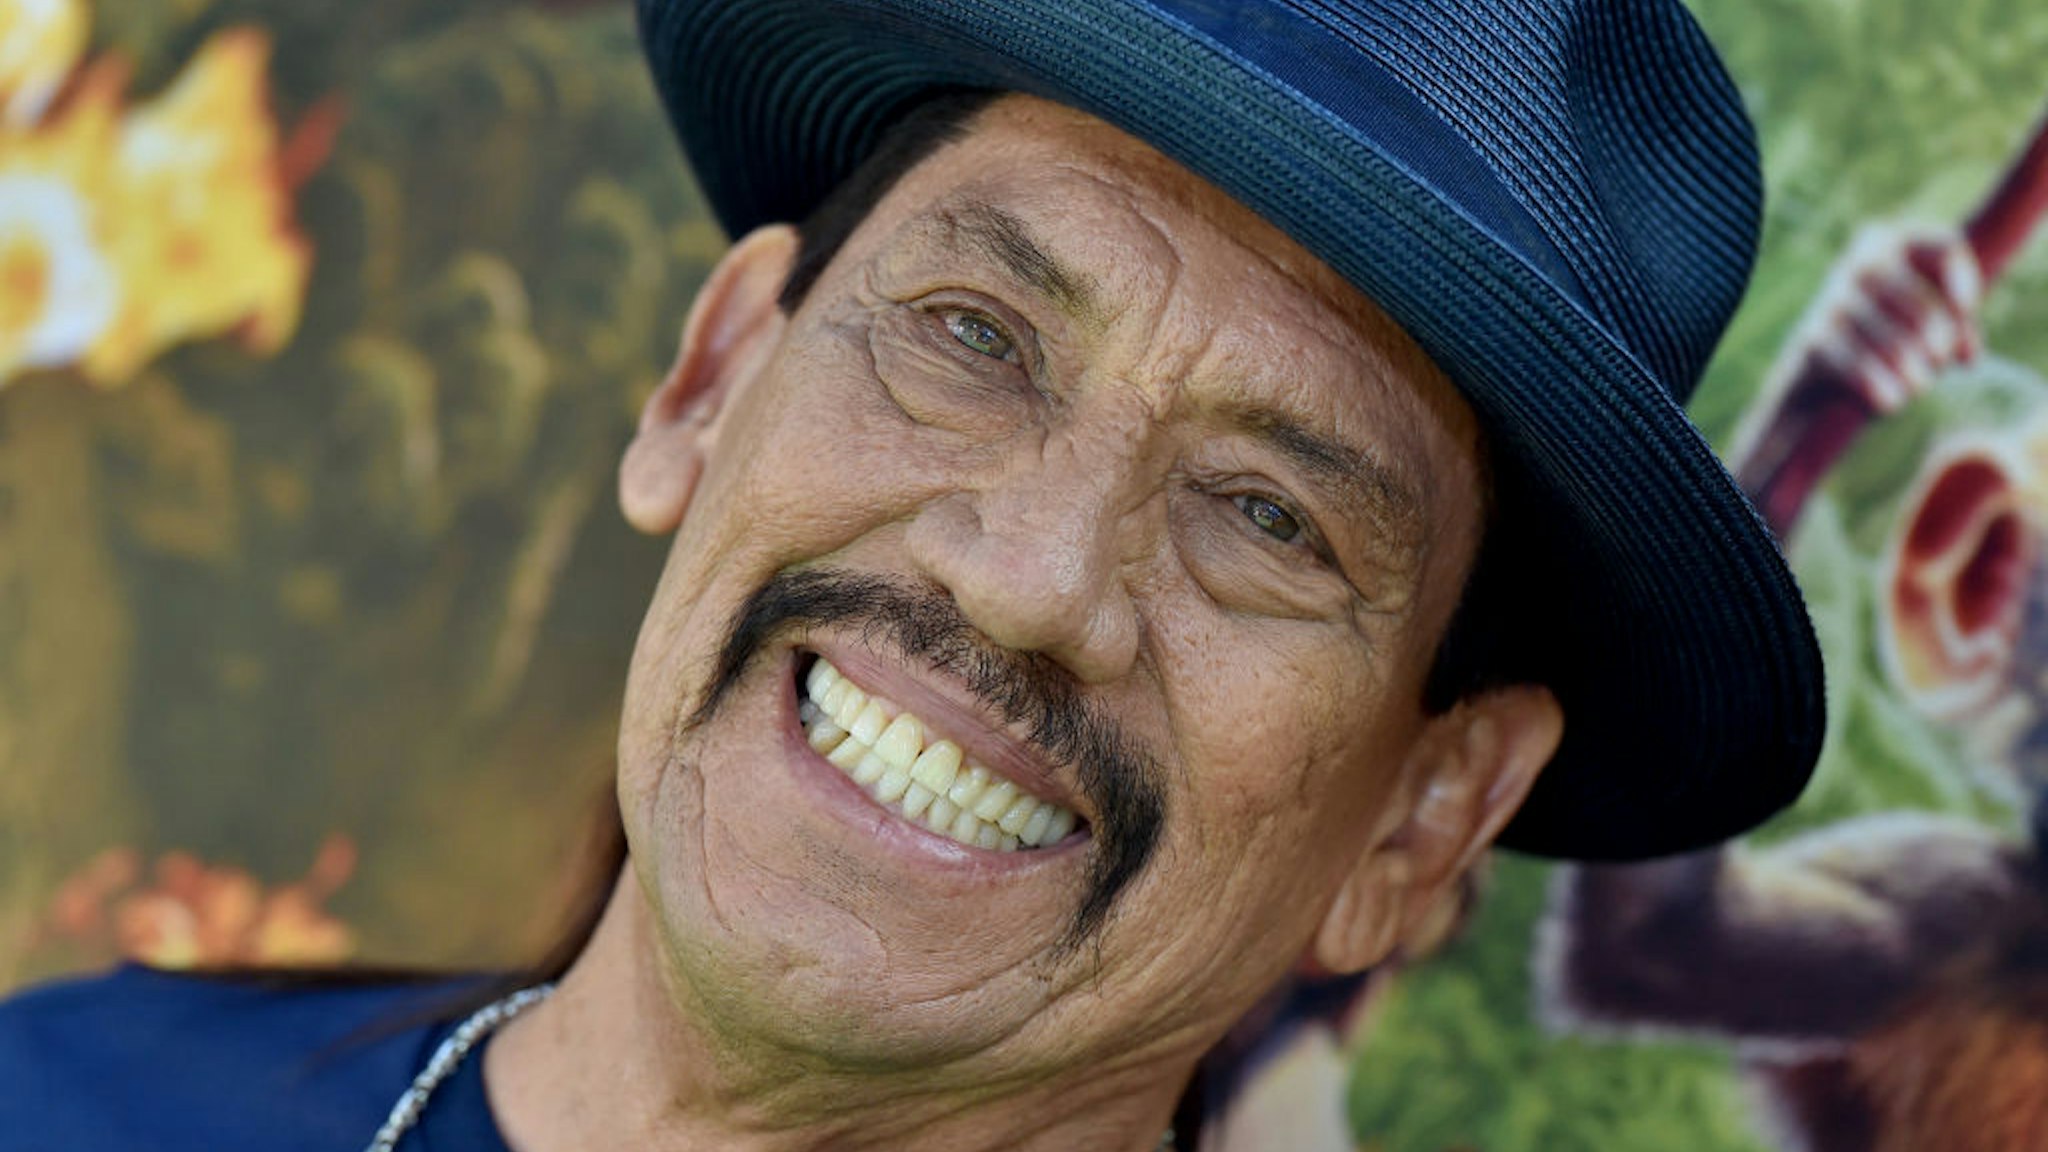 Danny Trejo attends the LA Premiere of Paramount Pictures' "Dora and the Lost City of Gold" at Regal Cinemas L.A. Live on July 28, 2019 in Los Angeles, California.